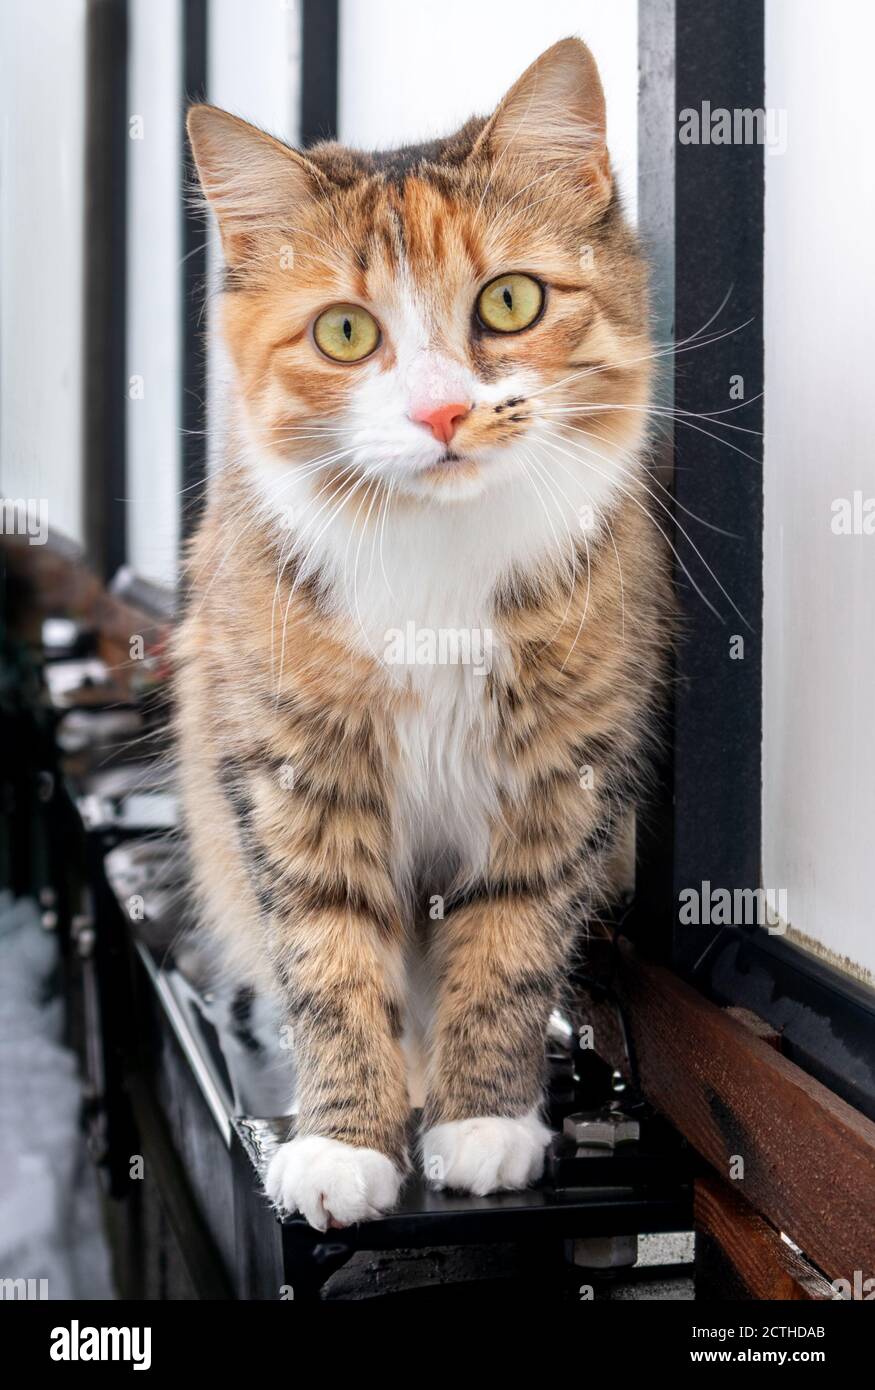 Front portrait of cute fluffy cat with yellow green eyes and long whiskers, outdoors. Female kitten with intense curious yellow eyes. Stock Photo